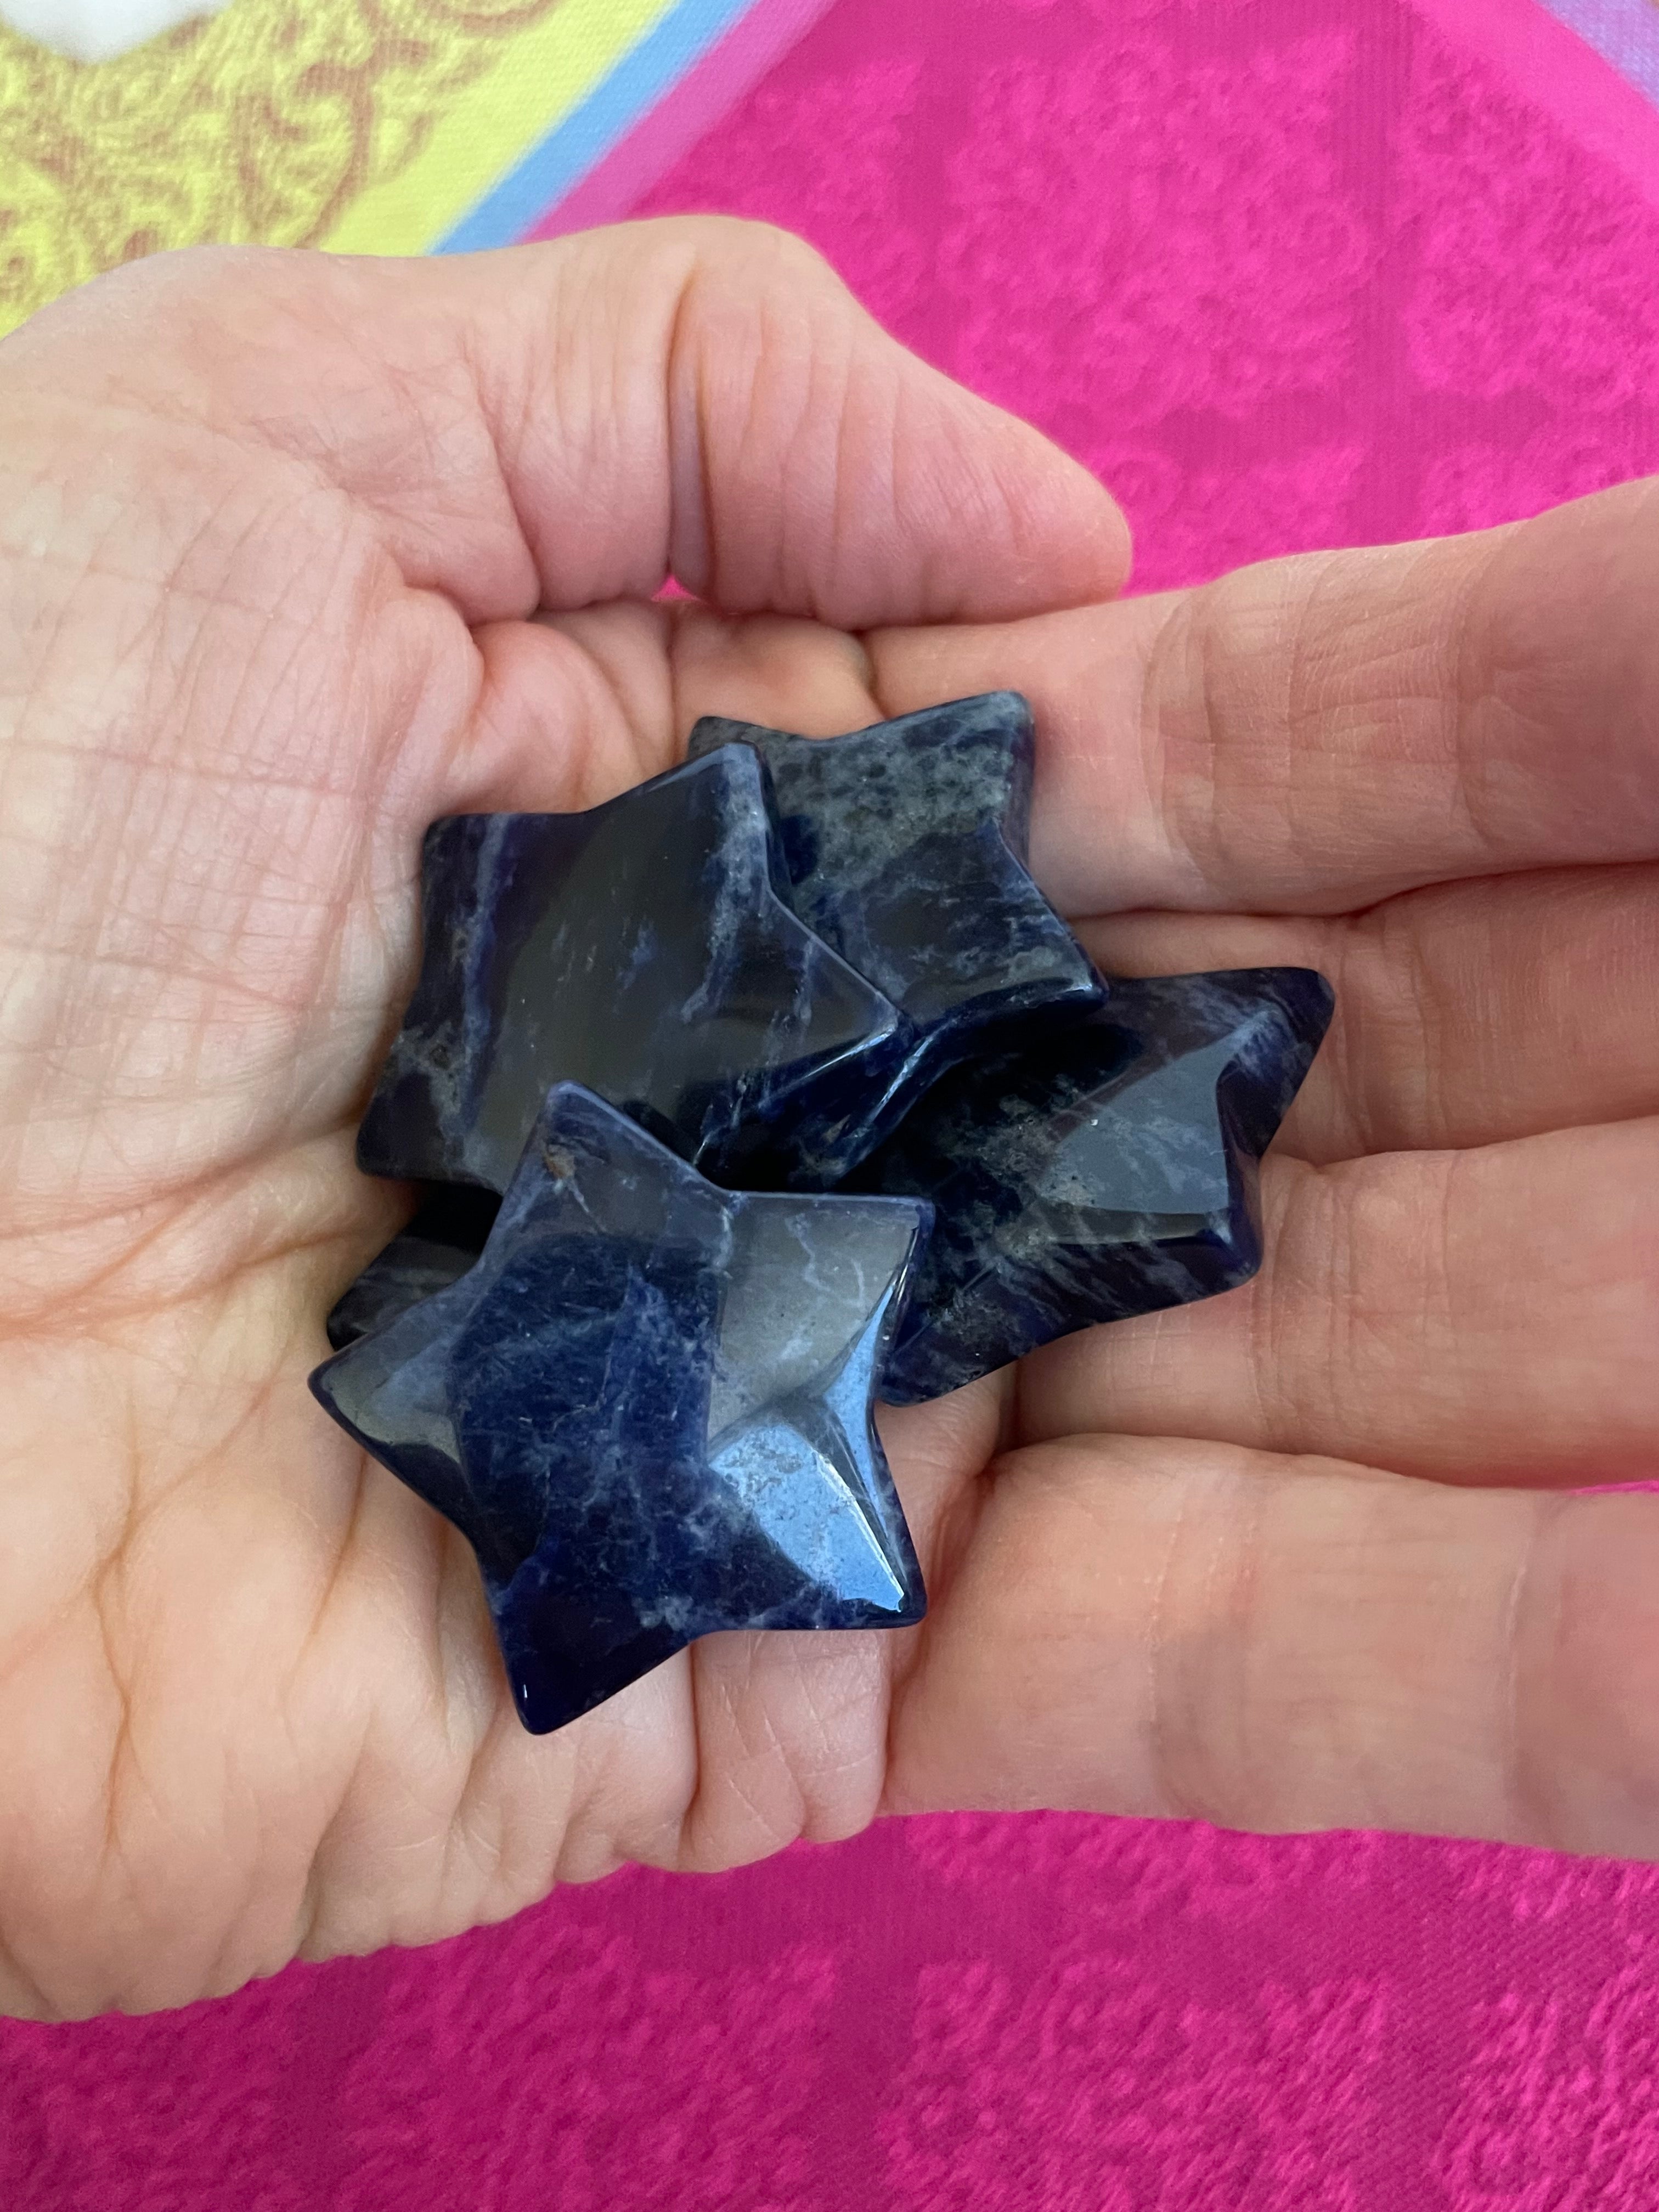 View of several sodalite stars. ﻿This powerful little sodalite crystal star can be used for meditation, healing, as an altar piece or as décor for any room in your home or office. Makes a wonderful gift too! Easy to slip right into your pocket so you can take the energy of sodalite wherever you go! Sodalite "Unites logic with intuition and opens spiritual perception" (Judy Hall). Approx. 1¼". Cost is $6 for one star. 